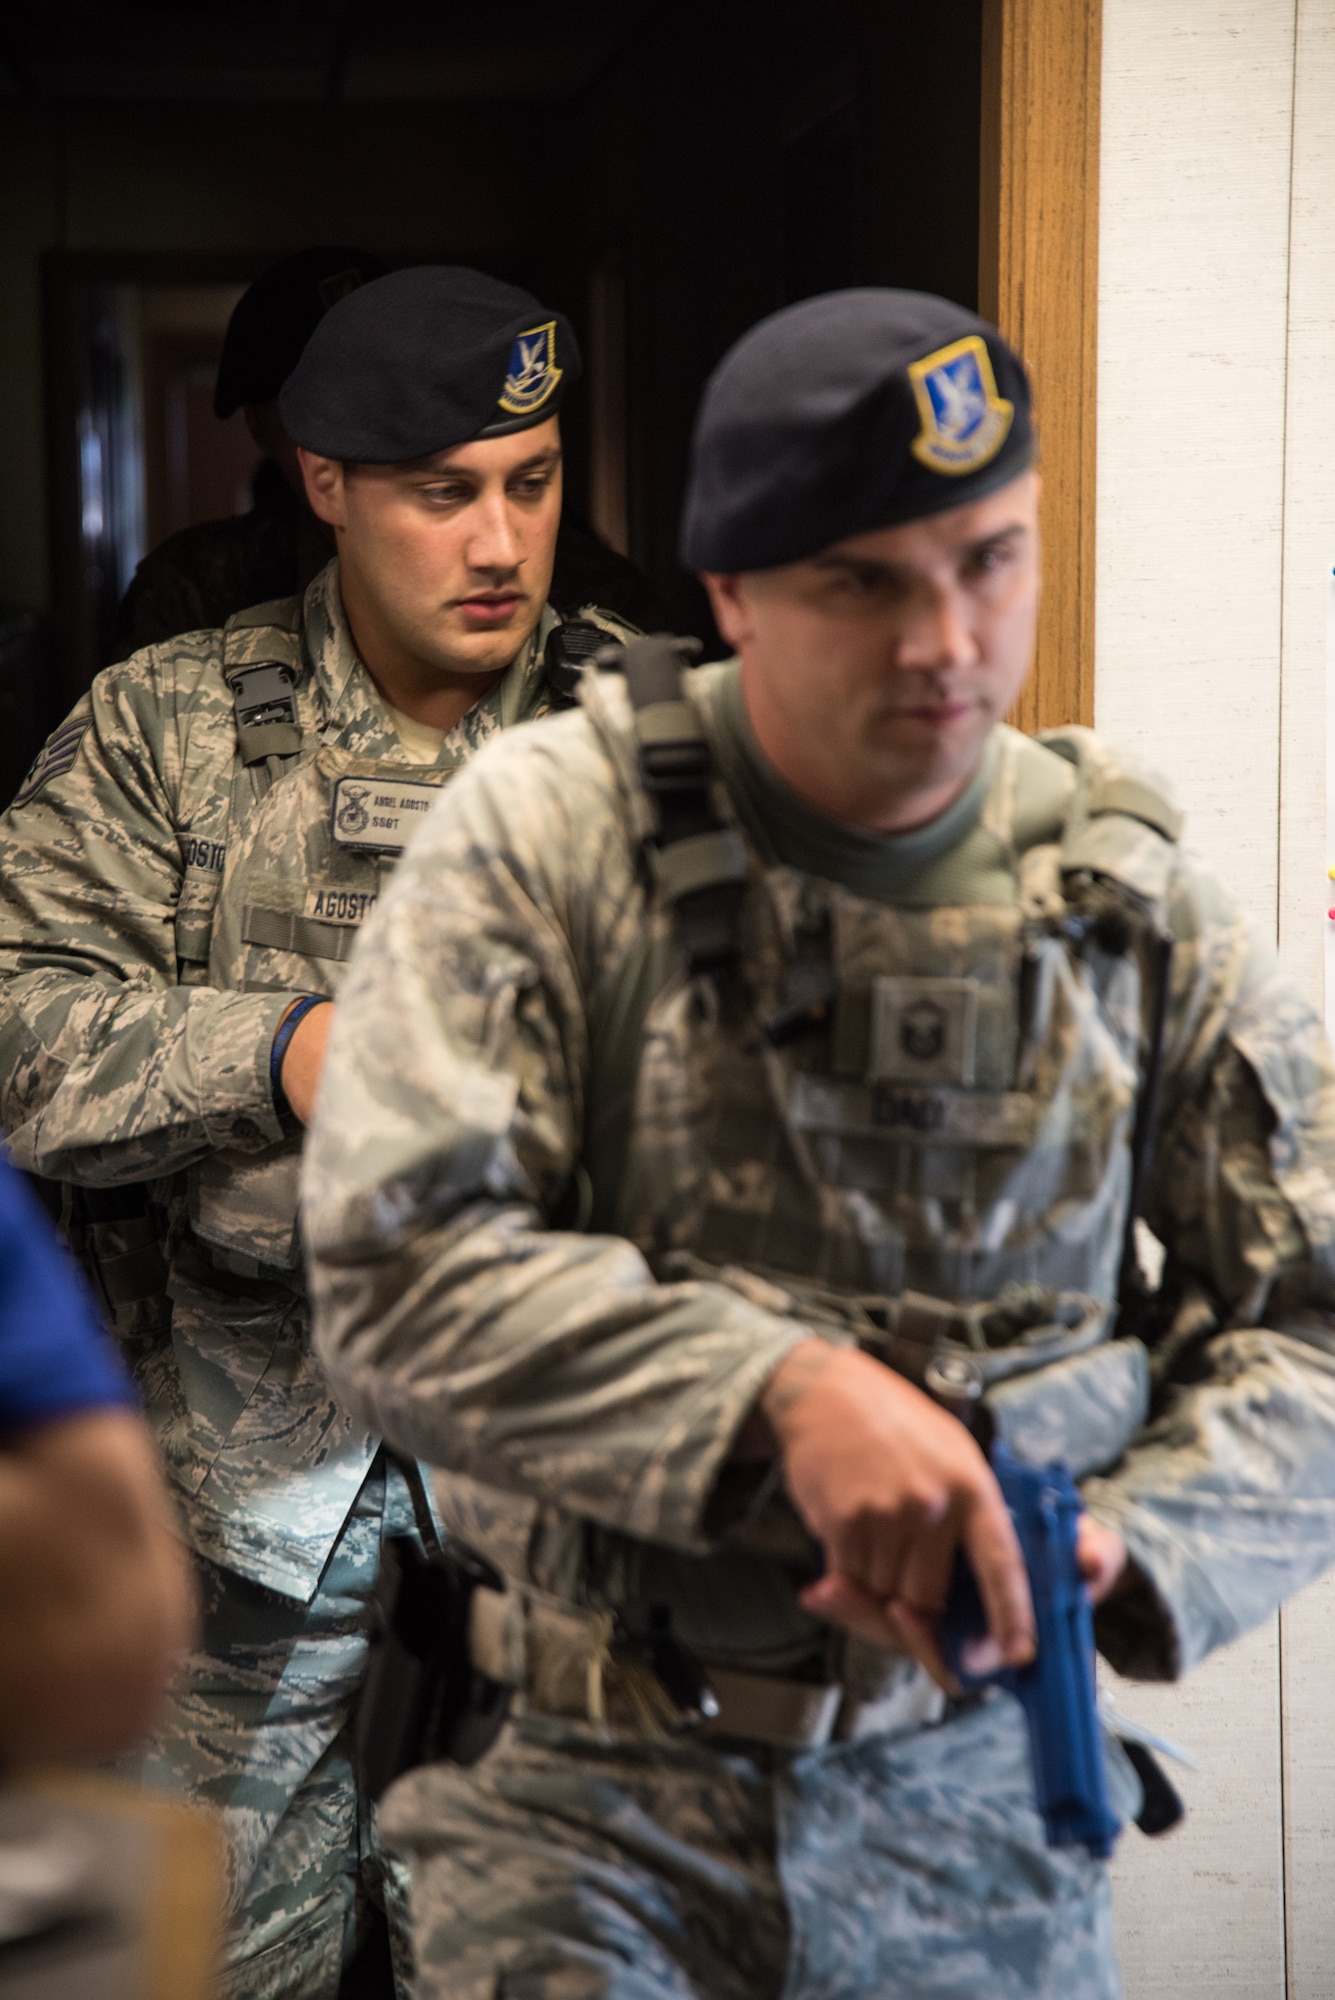 U.S. Air Force Master Sgt. Michael Daly (front) and Staff Sgt. Angel Agosto-Marrero (back), 166th Security Forces Squadron members, conduct a building search during an active-shooter exercise at New Castle Air National Guard Base, Aug. 22, 2019. During the exercise, a designated active shooter entered a building and simulated opening fire. First responders, such as Security Forces, Fire Protection and Emergency Management neutralized the threat and triaged wounded personnel, while all other personnel participated in an installation-wide lockdown. (U.S. Air National Guard Photo by Mr. Mitchell Topal)